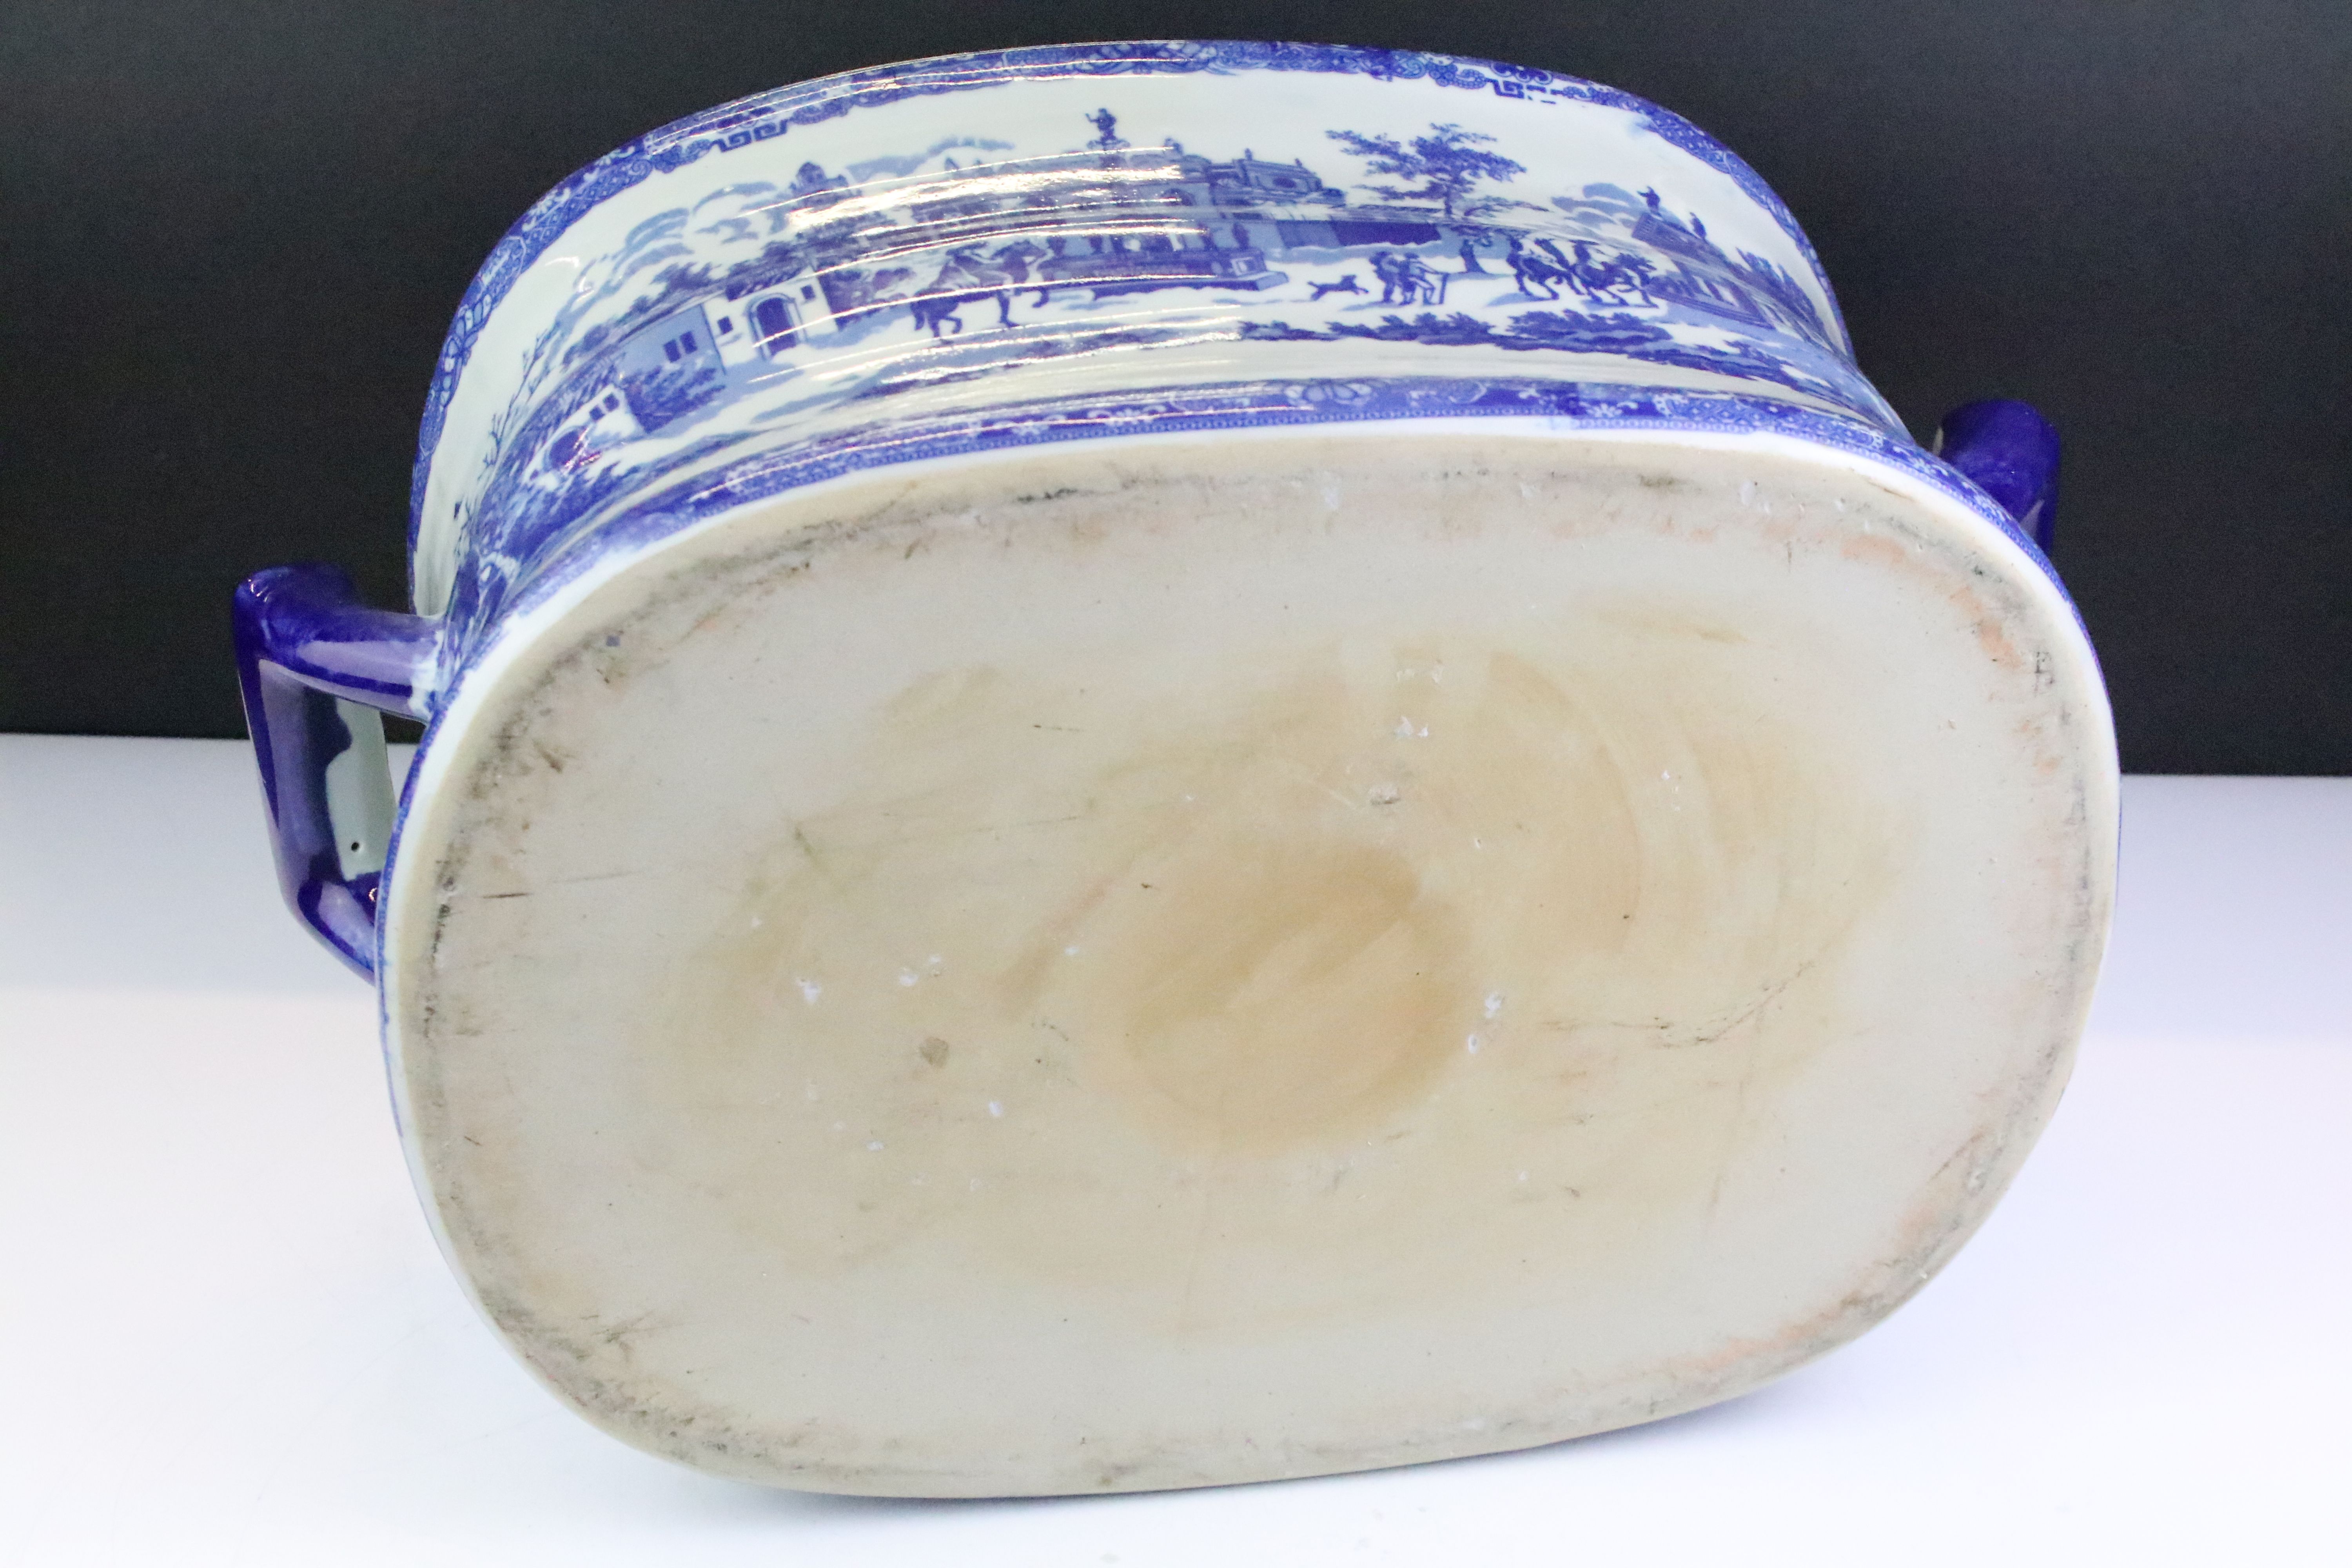 Large 19th century style Blue and White Ironstone Twin Handled Footbath, 47cm long x 21cm high - Image 4 of 4